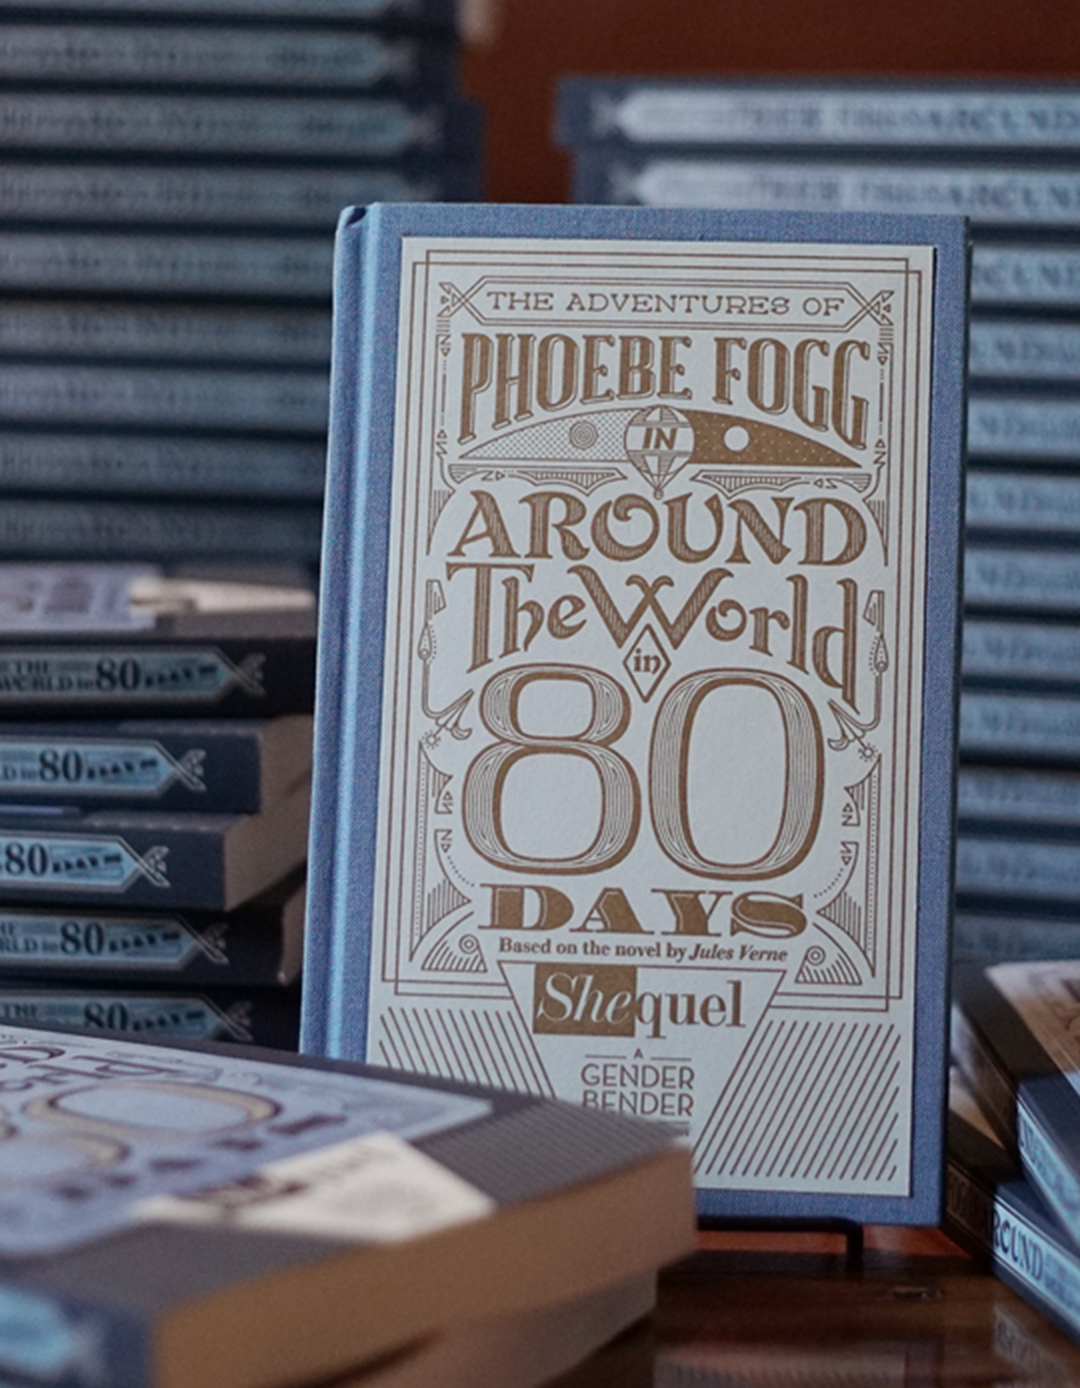 The Adventures of Phoebe Fogg in Around the World in 80 Days